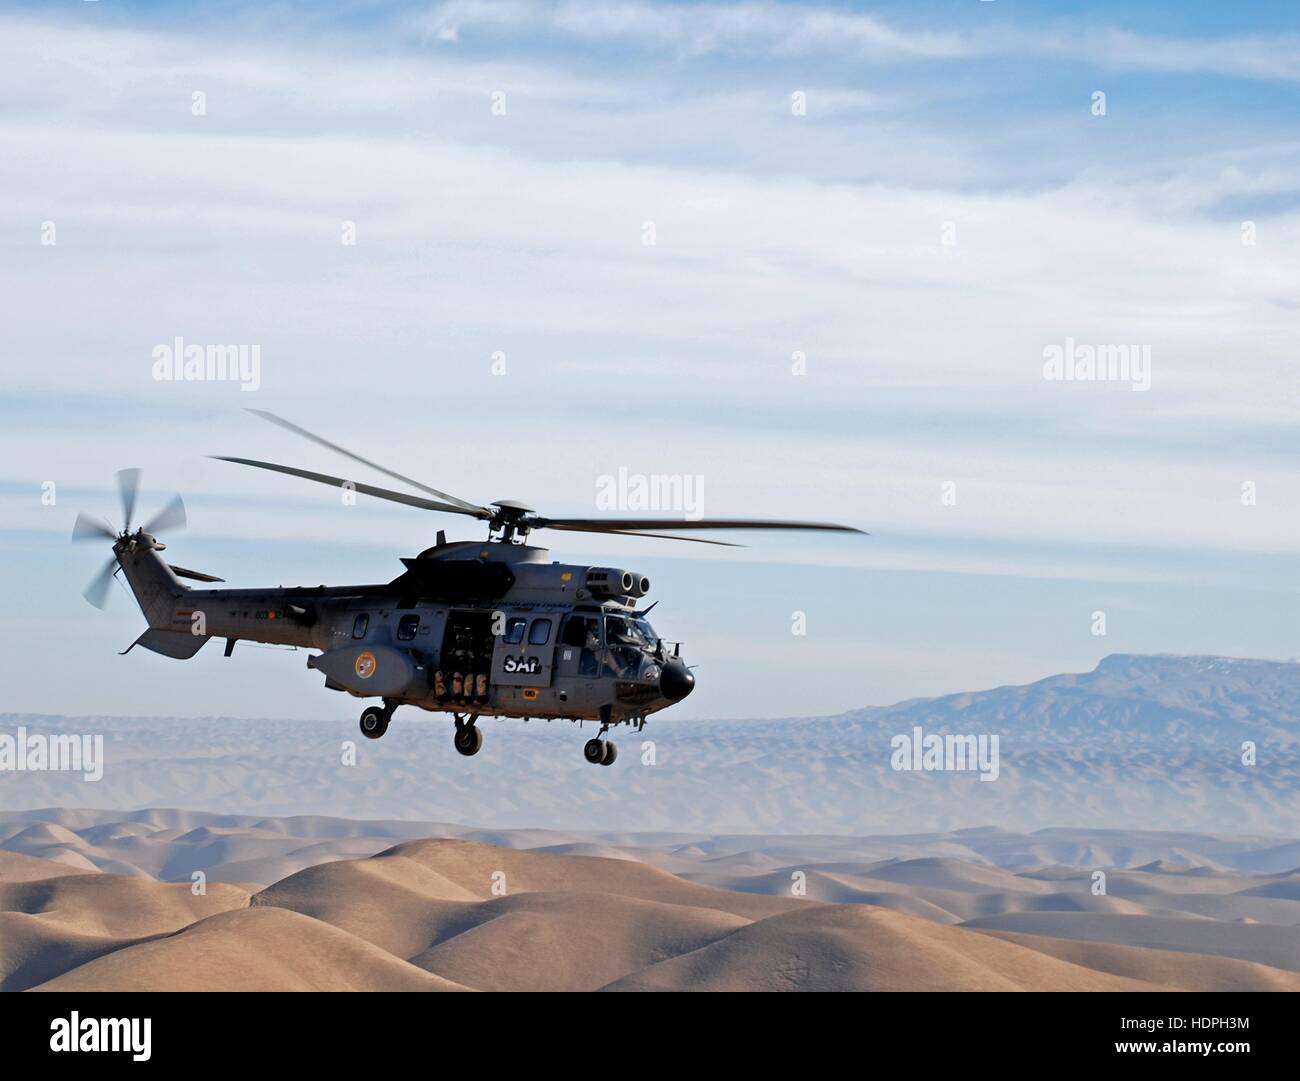 A Spanish Air Force Eurocopter AS332 Super Puma utility helicopter flies over the desert sand dunes December 24, 2008 in Herat, Afghanistan. Stock Photo